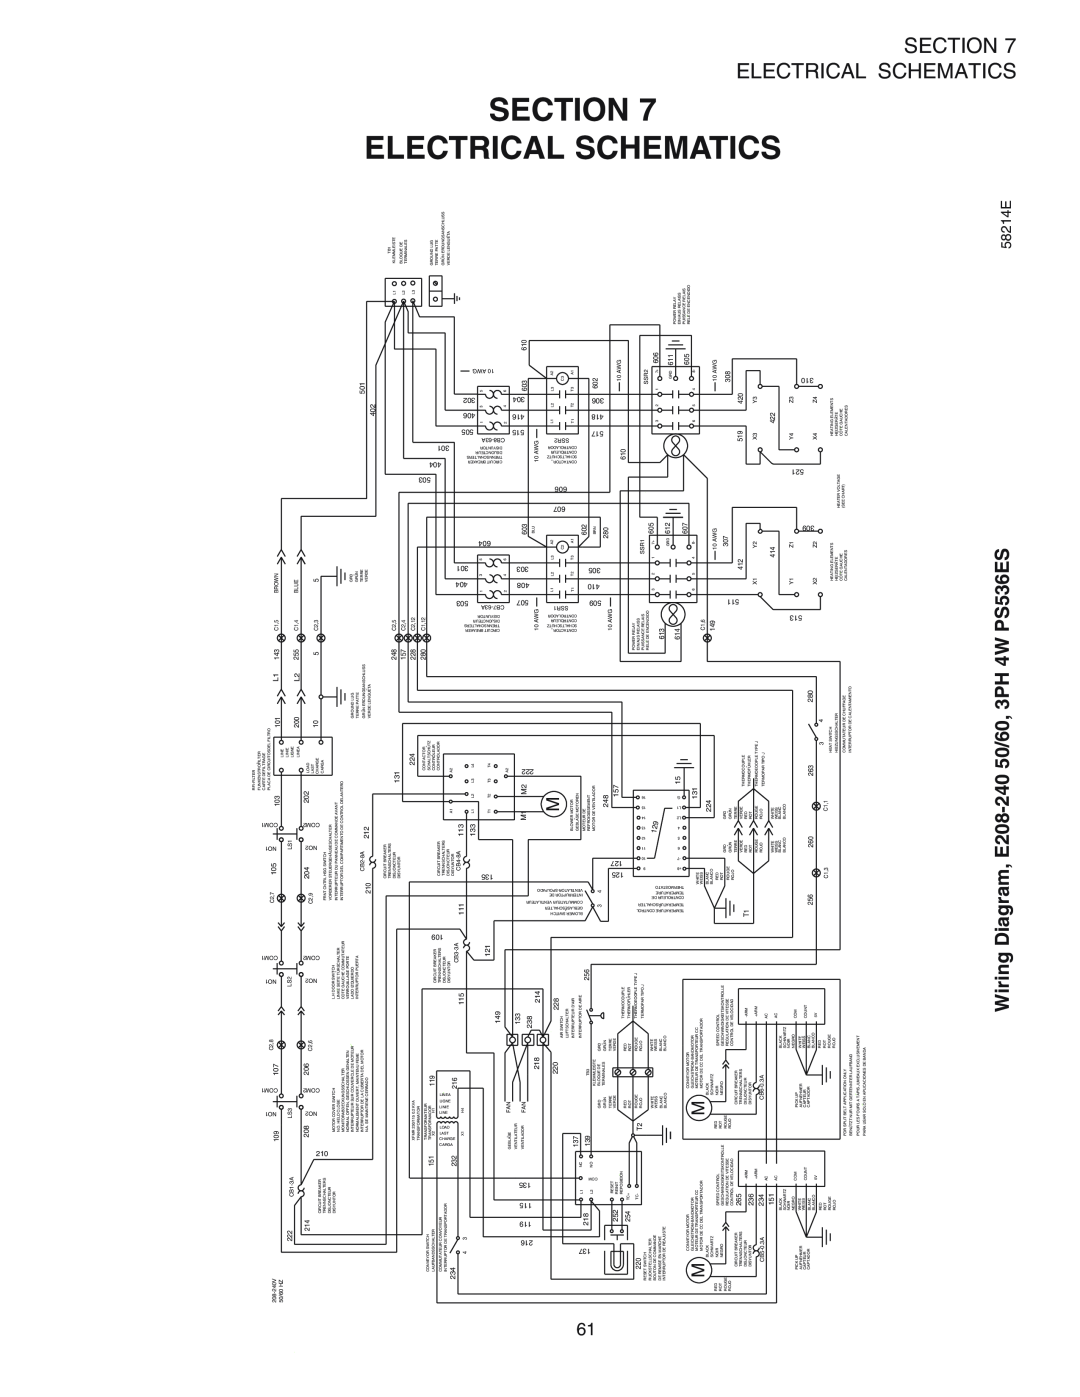 Middleby Marshall installation manual Electrical, Schematics, Section, Wiring Diagram, E208-240 50/60, 3PH 4W PS536ES 